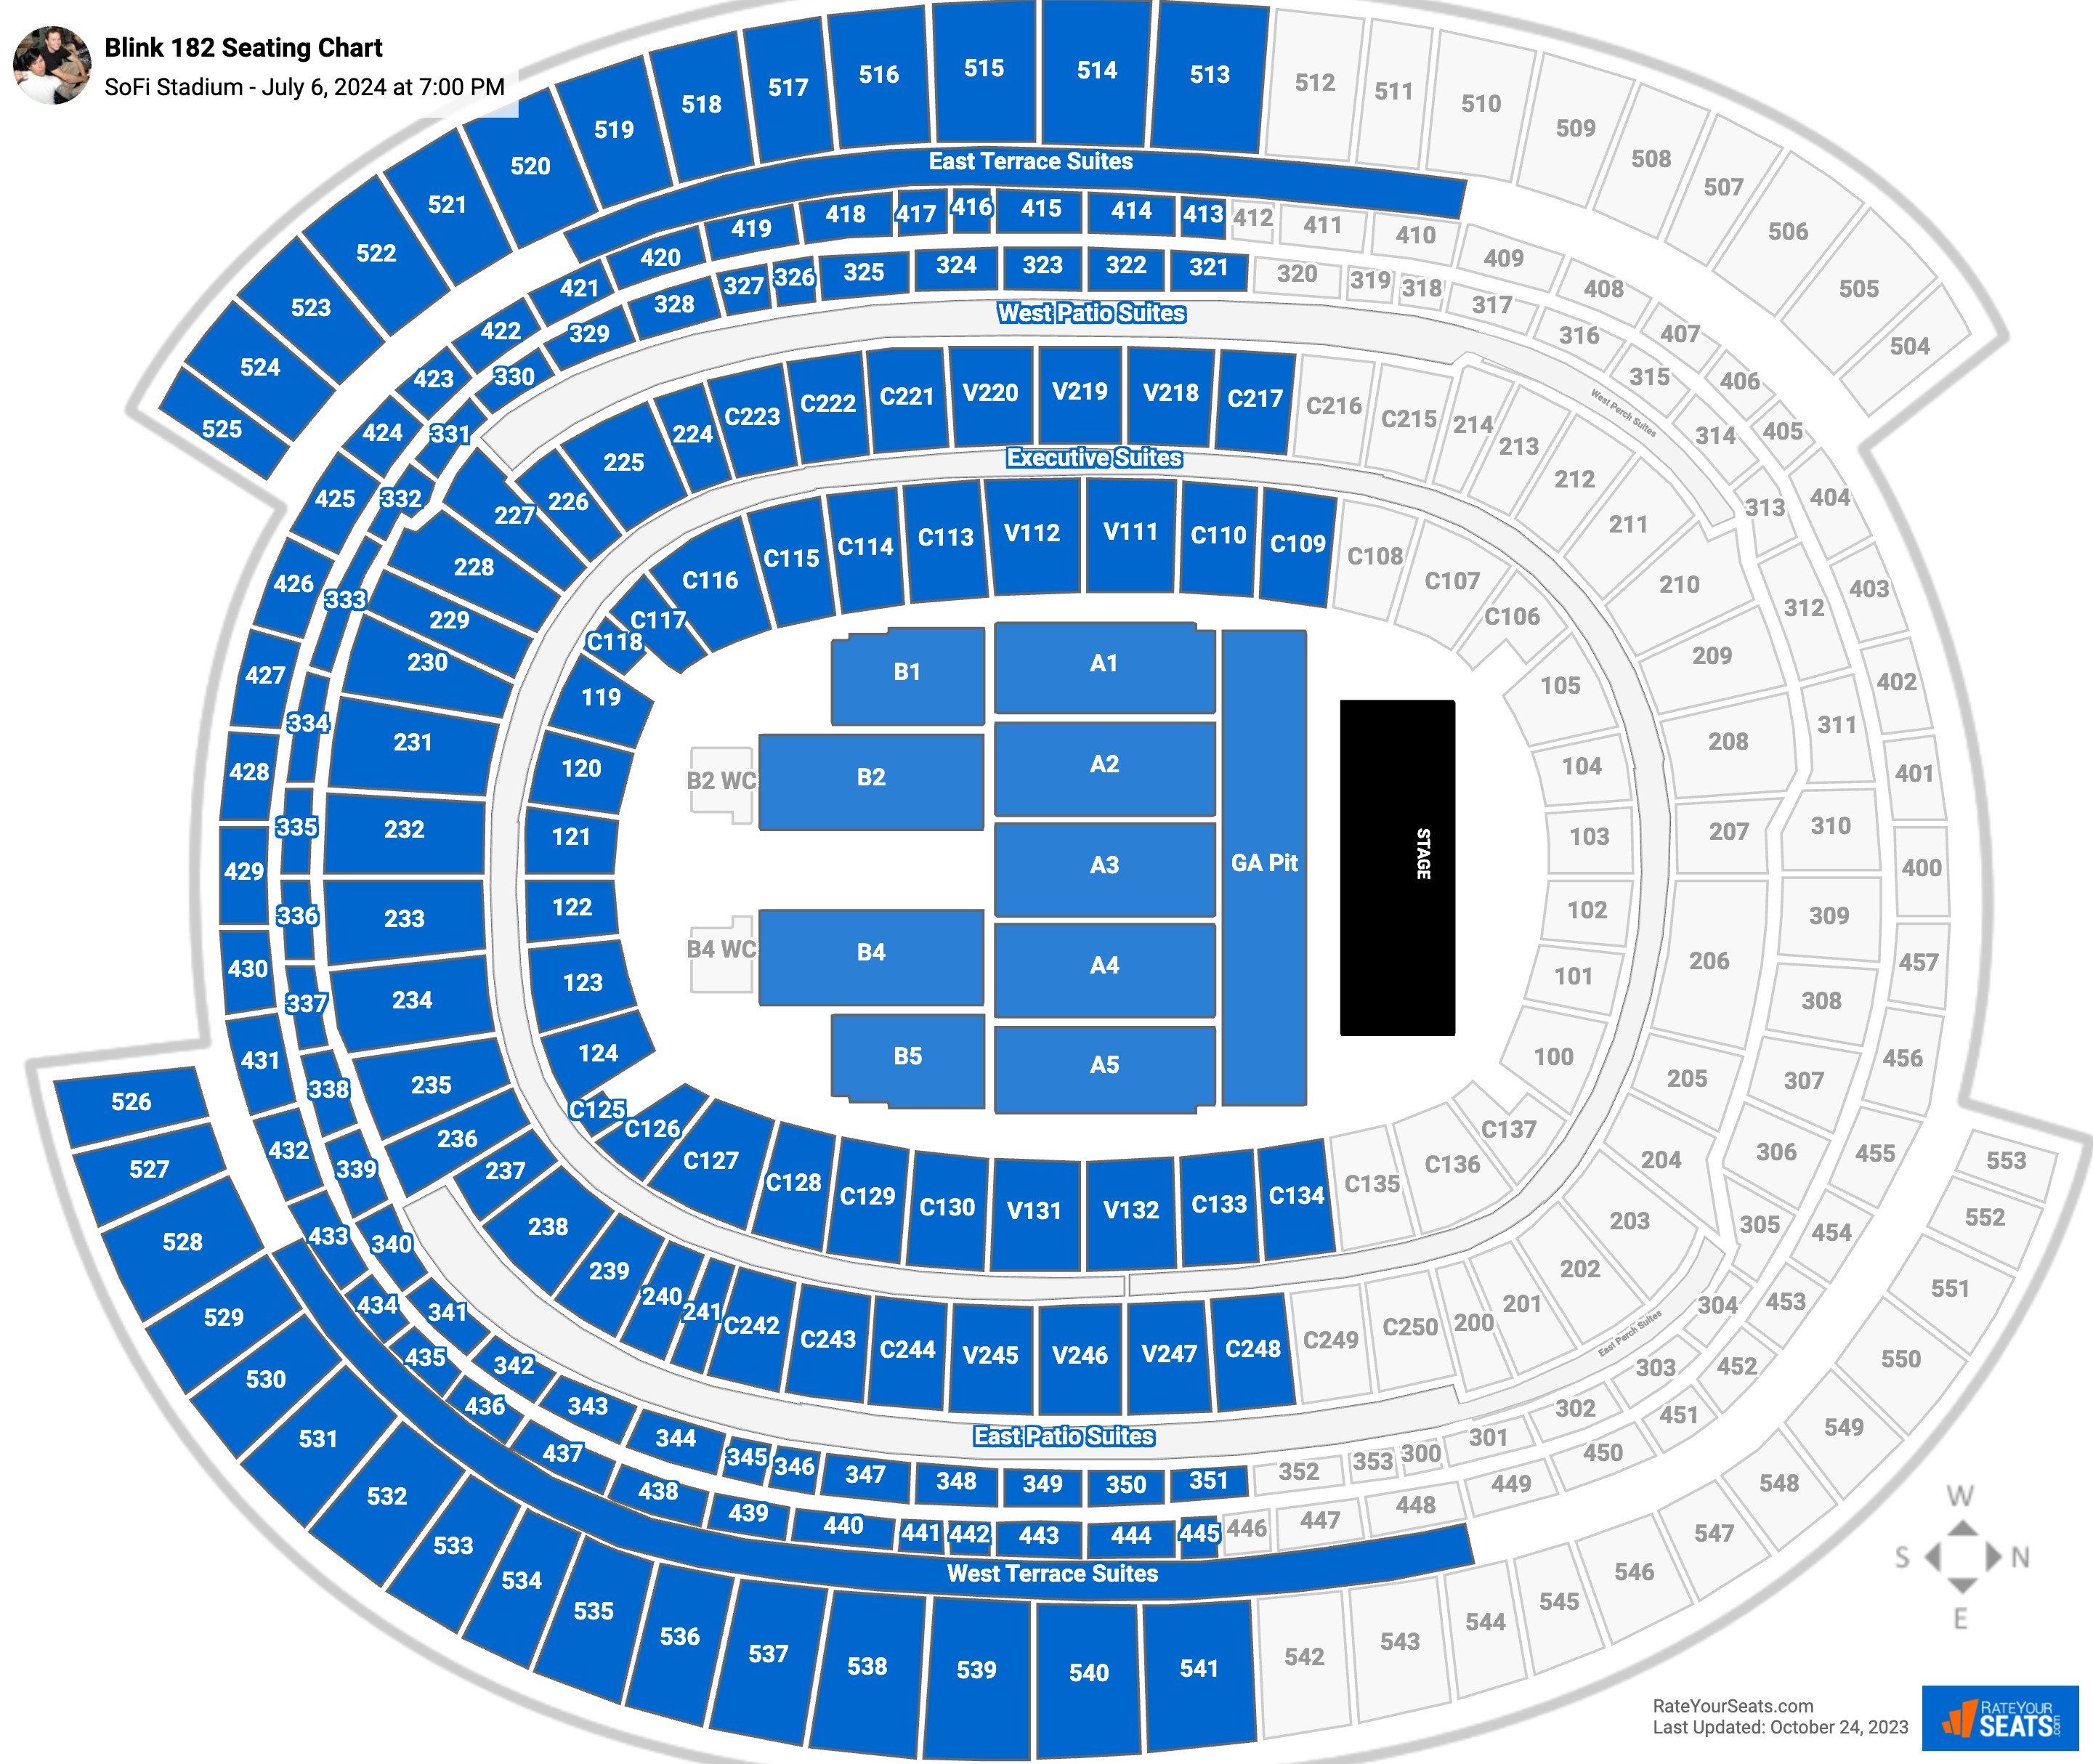 SoFi Stadium Tickets, Seating Charts and Schedule inglewood CA at StubPass!